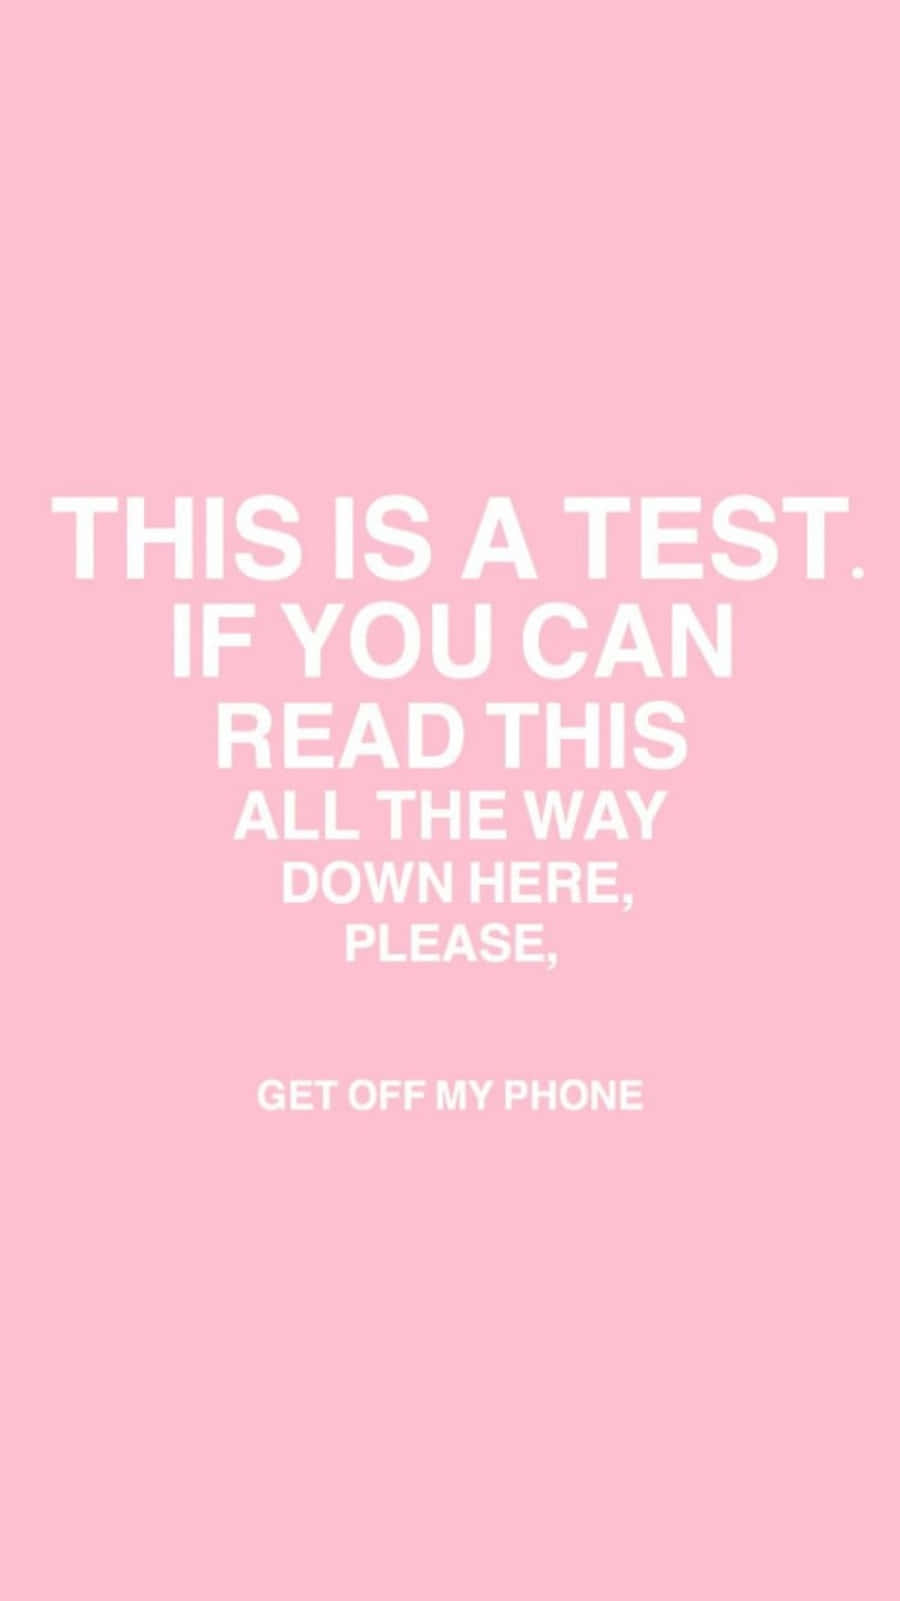 This Is A Test If You Can Read This In A Way Please Get Off My Phone Wallpaper